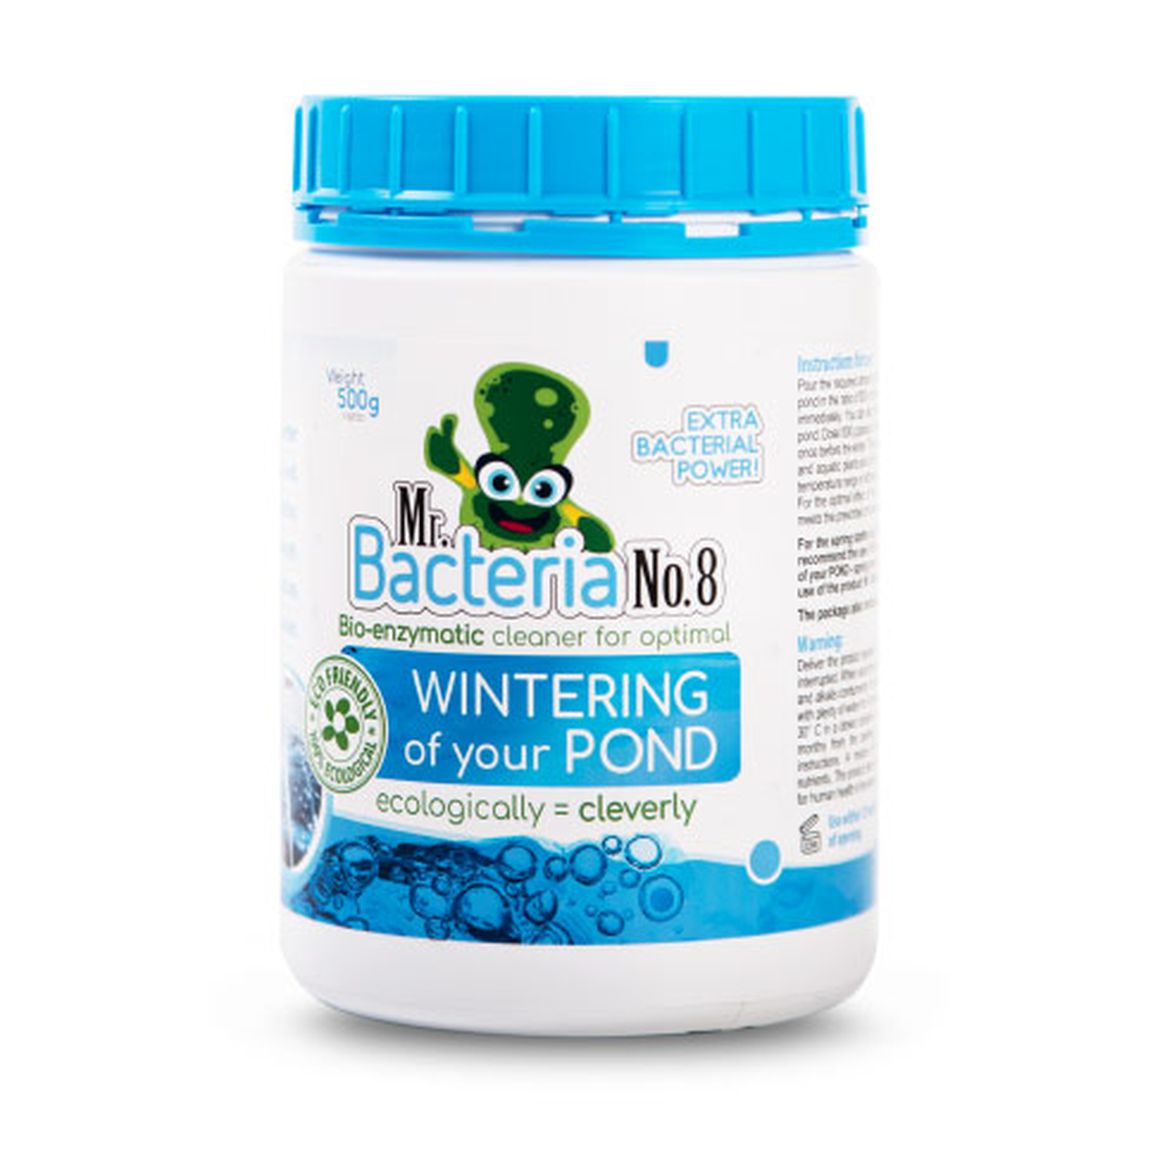 Mr. Bacteria No.8 Bio-enzymatic cleaner for optimal